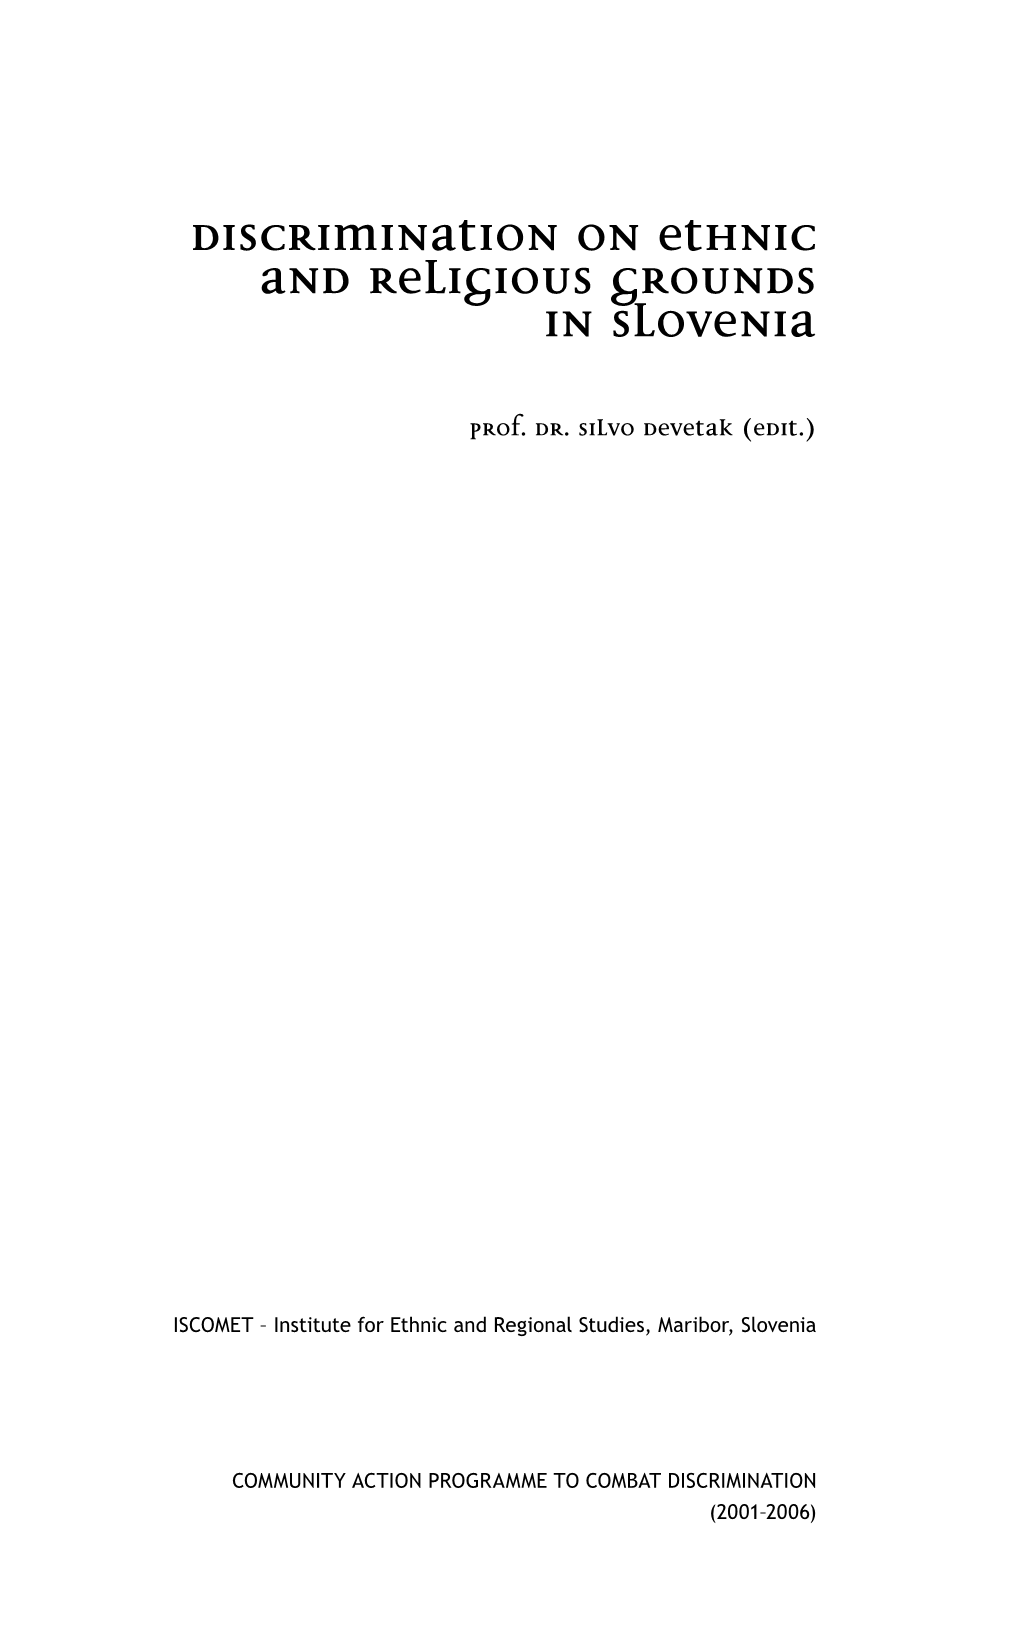 Discrimination on Ethnic and Religious Grounds in Slovenia